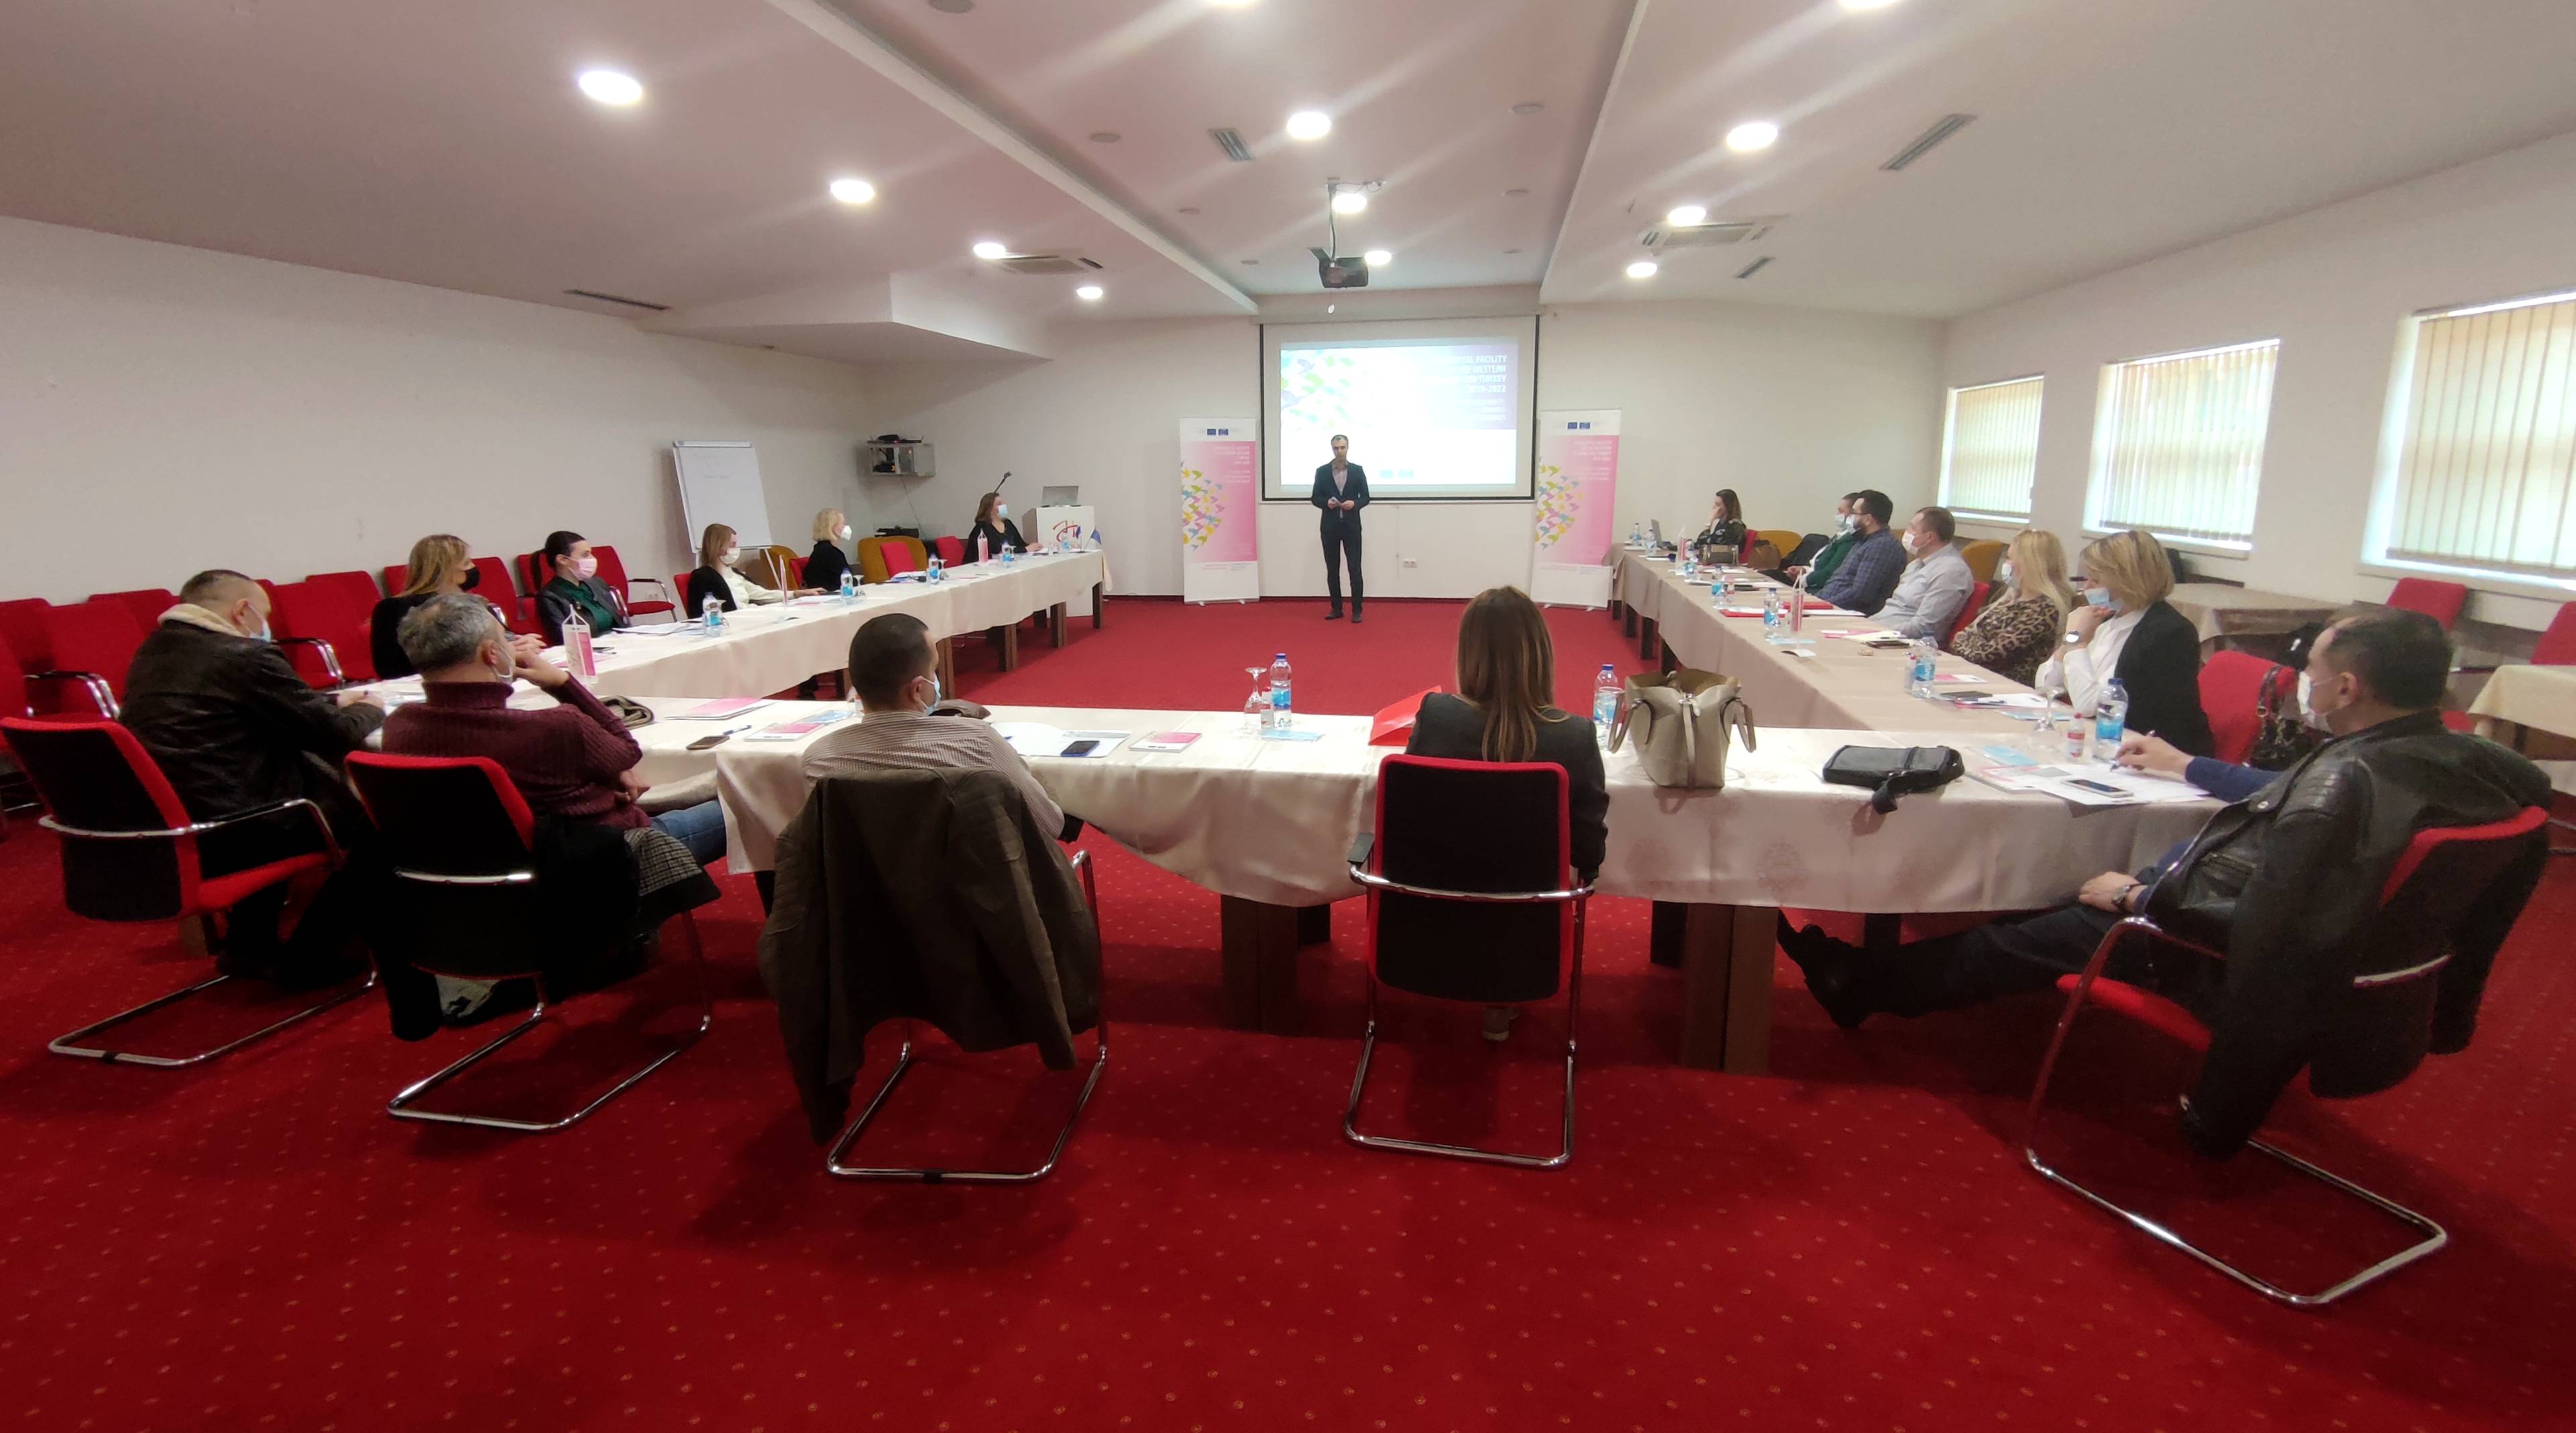 Capacity building training on trafficking in human beings for the purpose of labour exploitation in Bosnia and Herzegovina – third training held for professionals in Republika Srpska